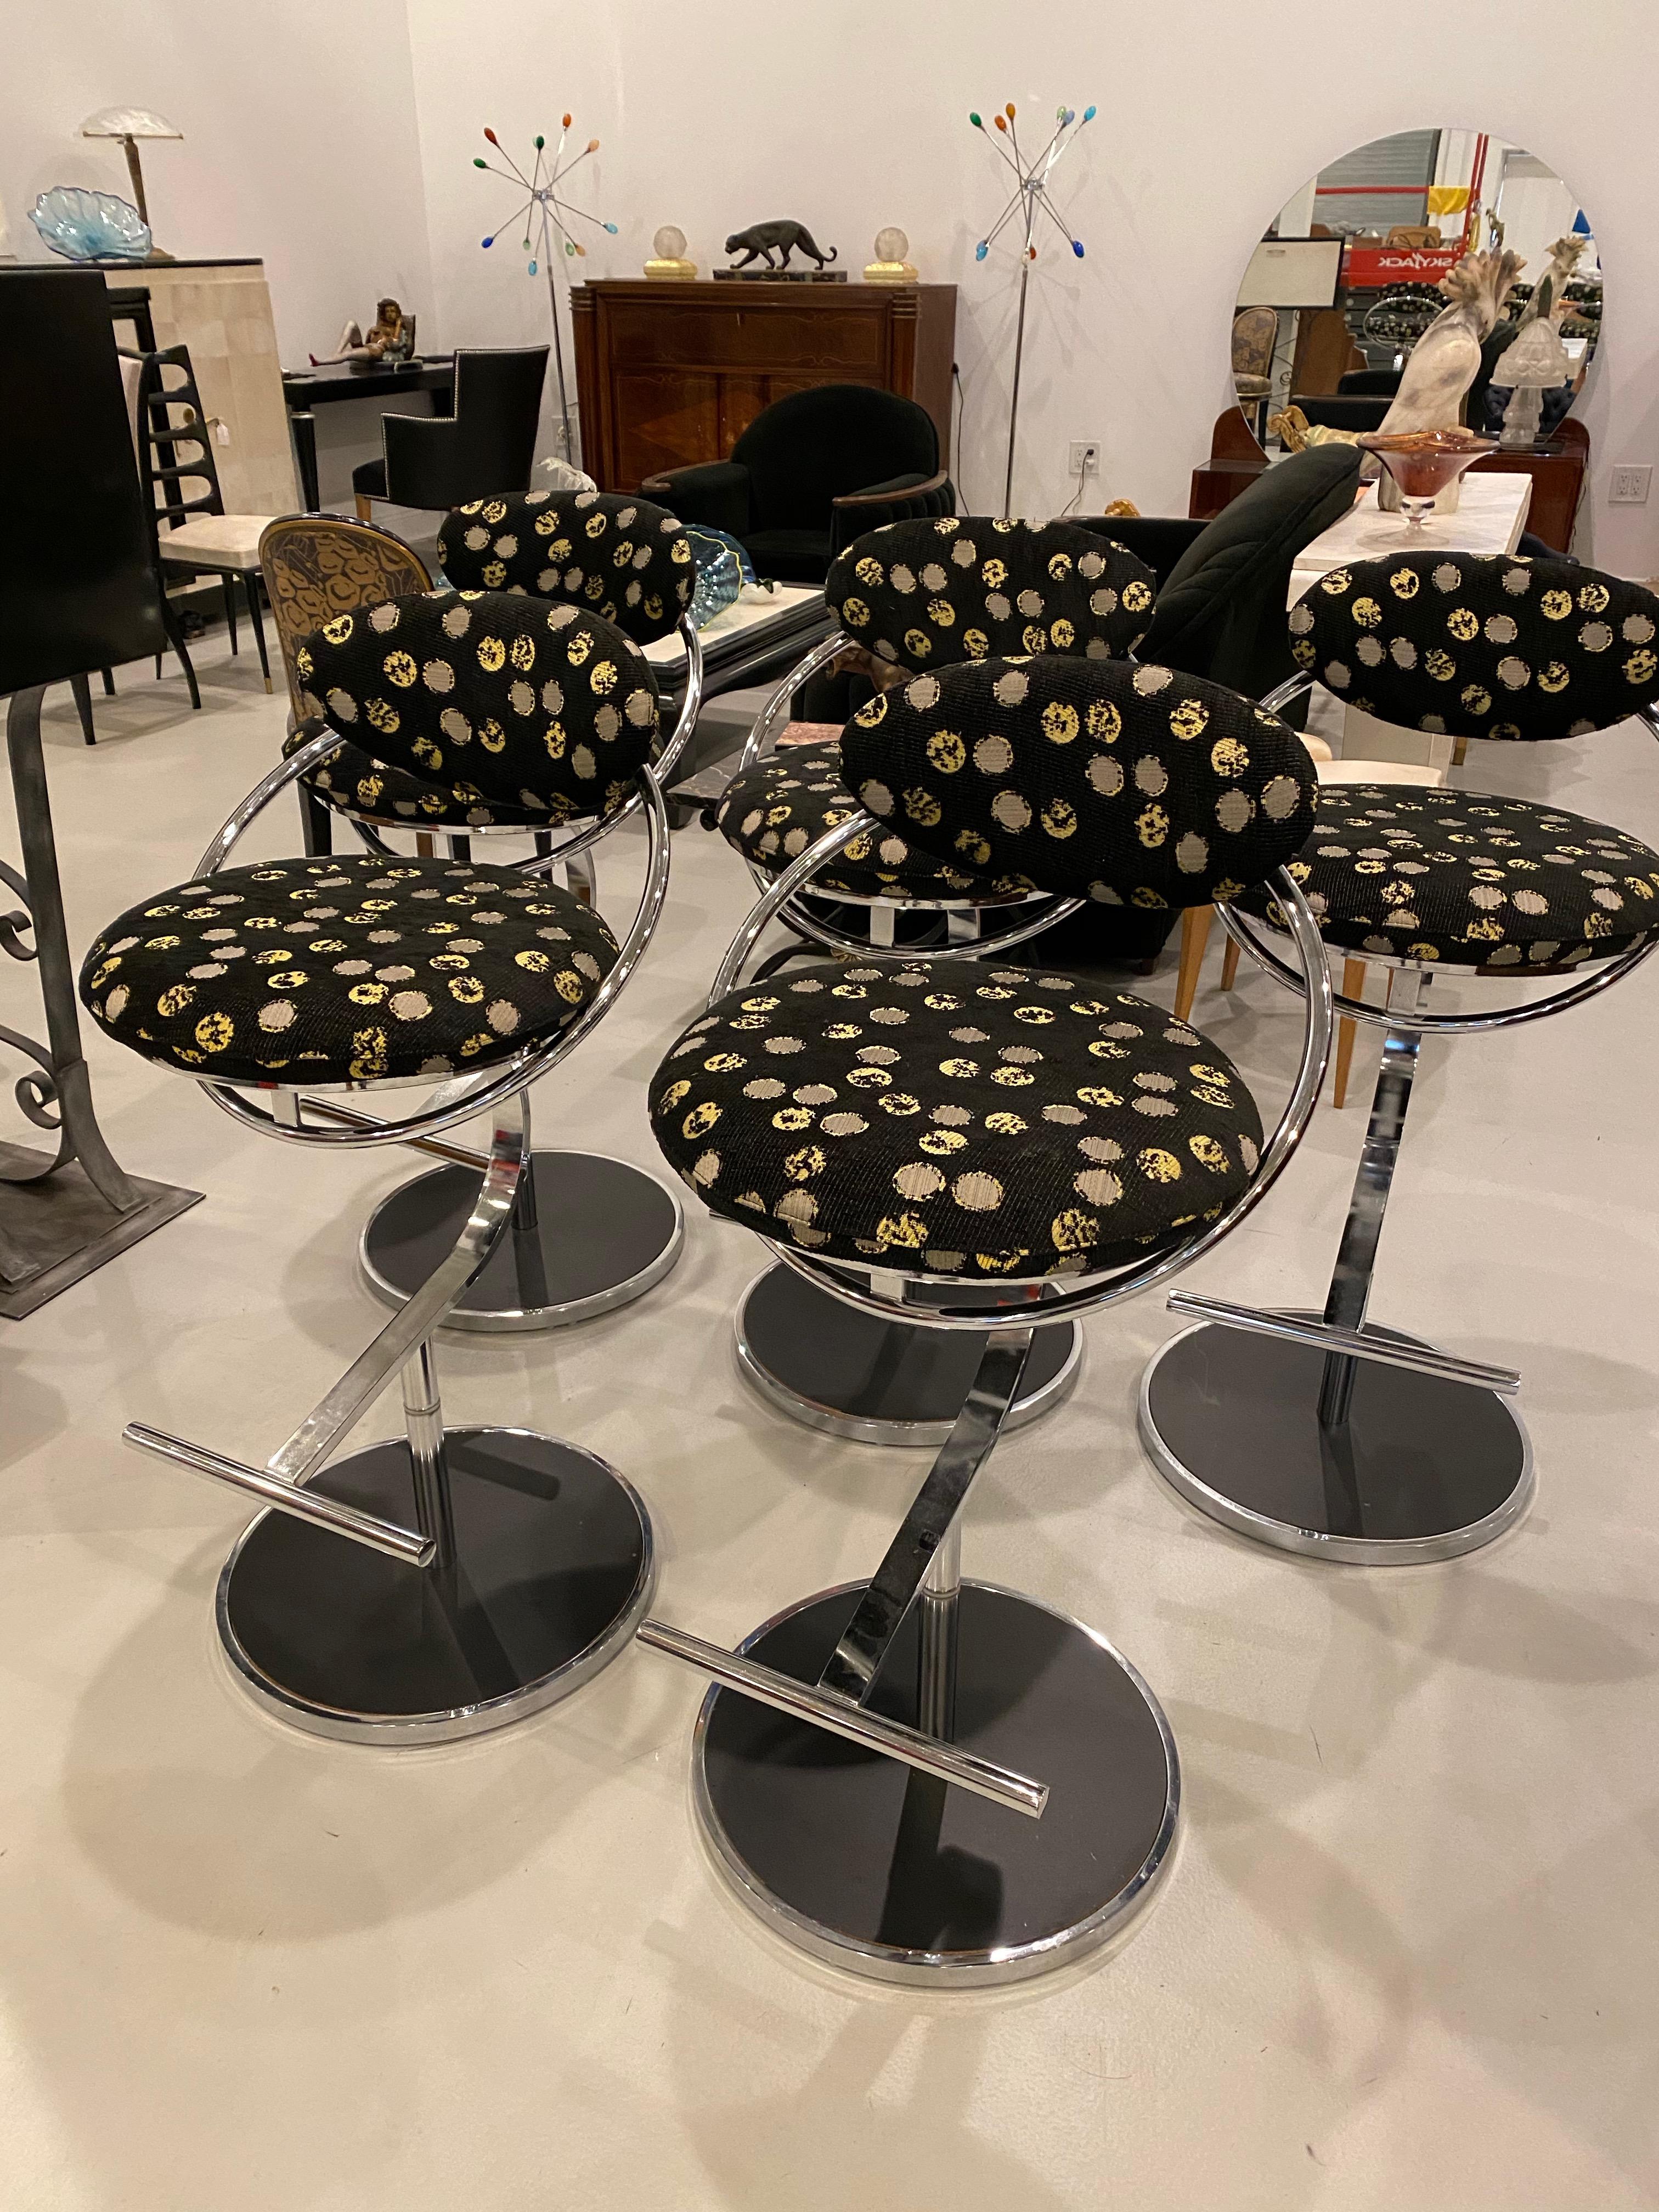 Set of five chrome bar stools. Reupholstery in good condition. Great for a bar or kitchen stools.